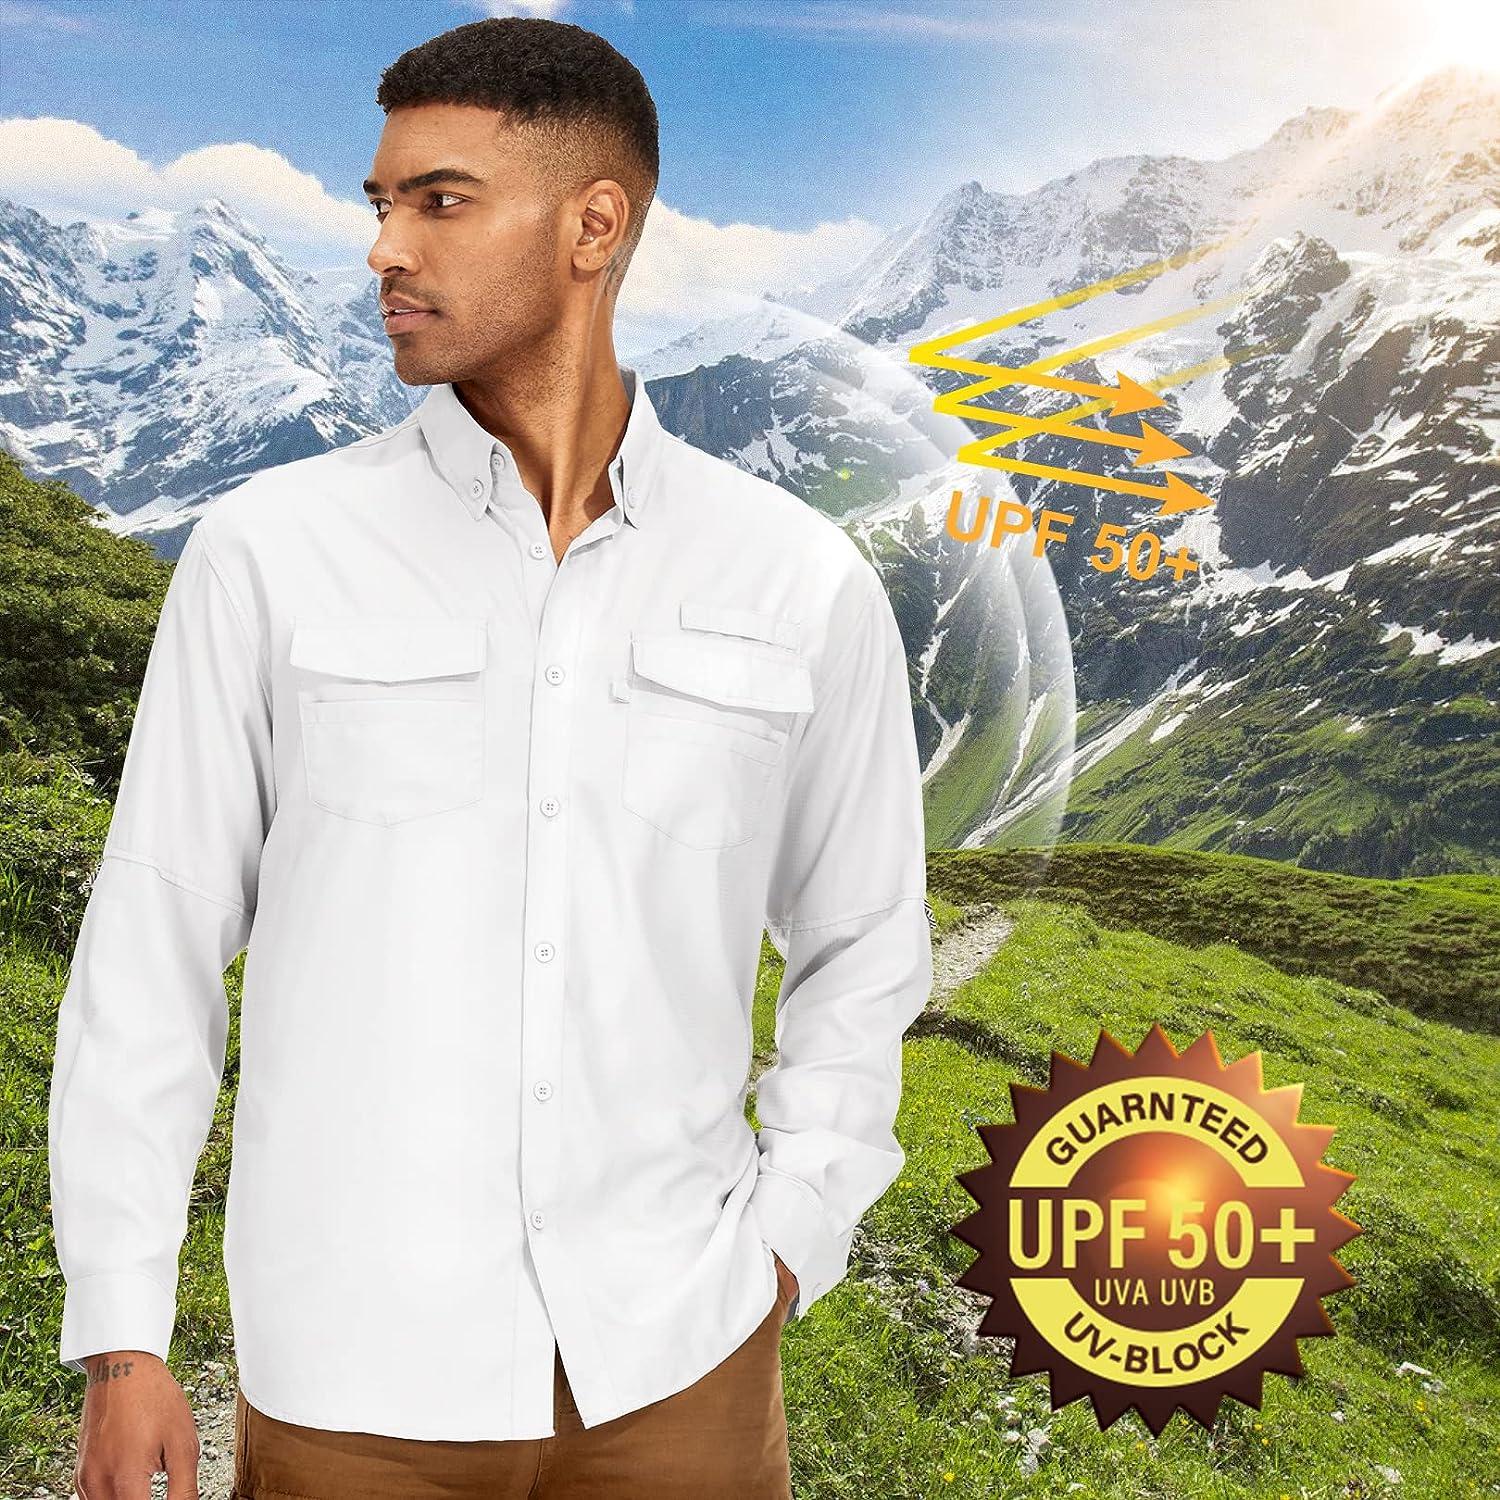 adviicd Long Sleeve Shirts For Men Men's Fishing Shirts with